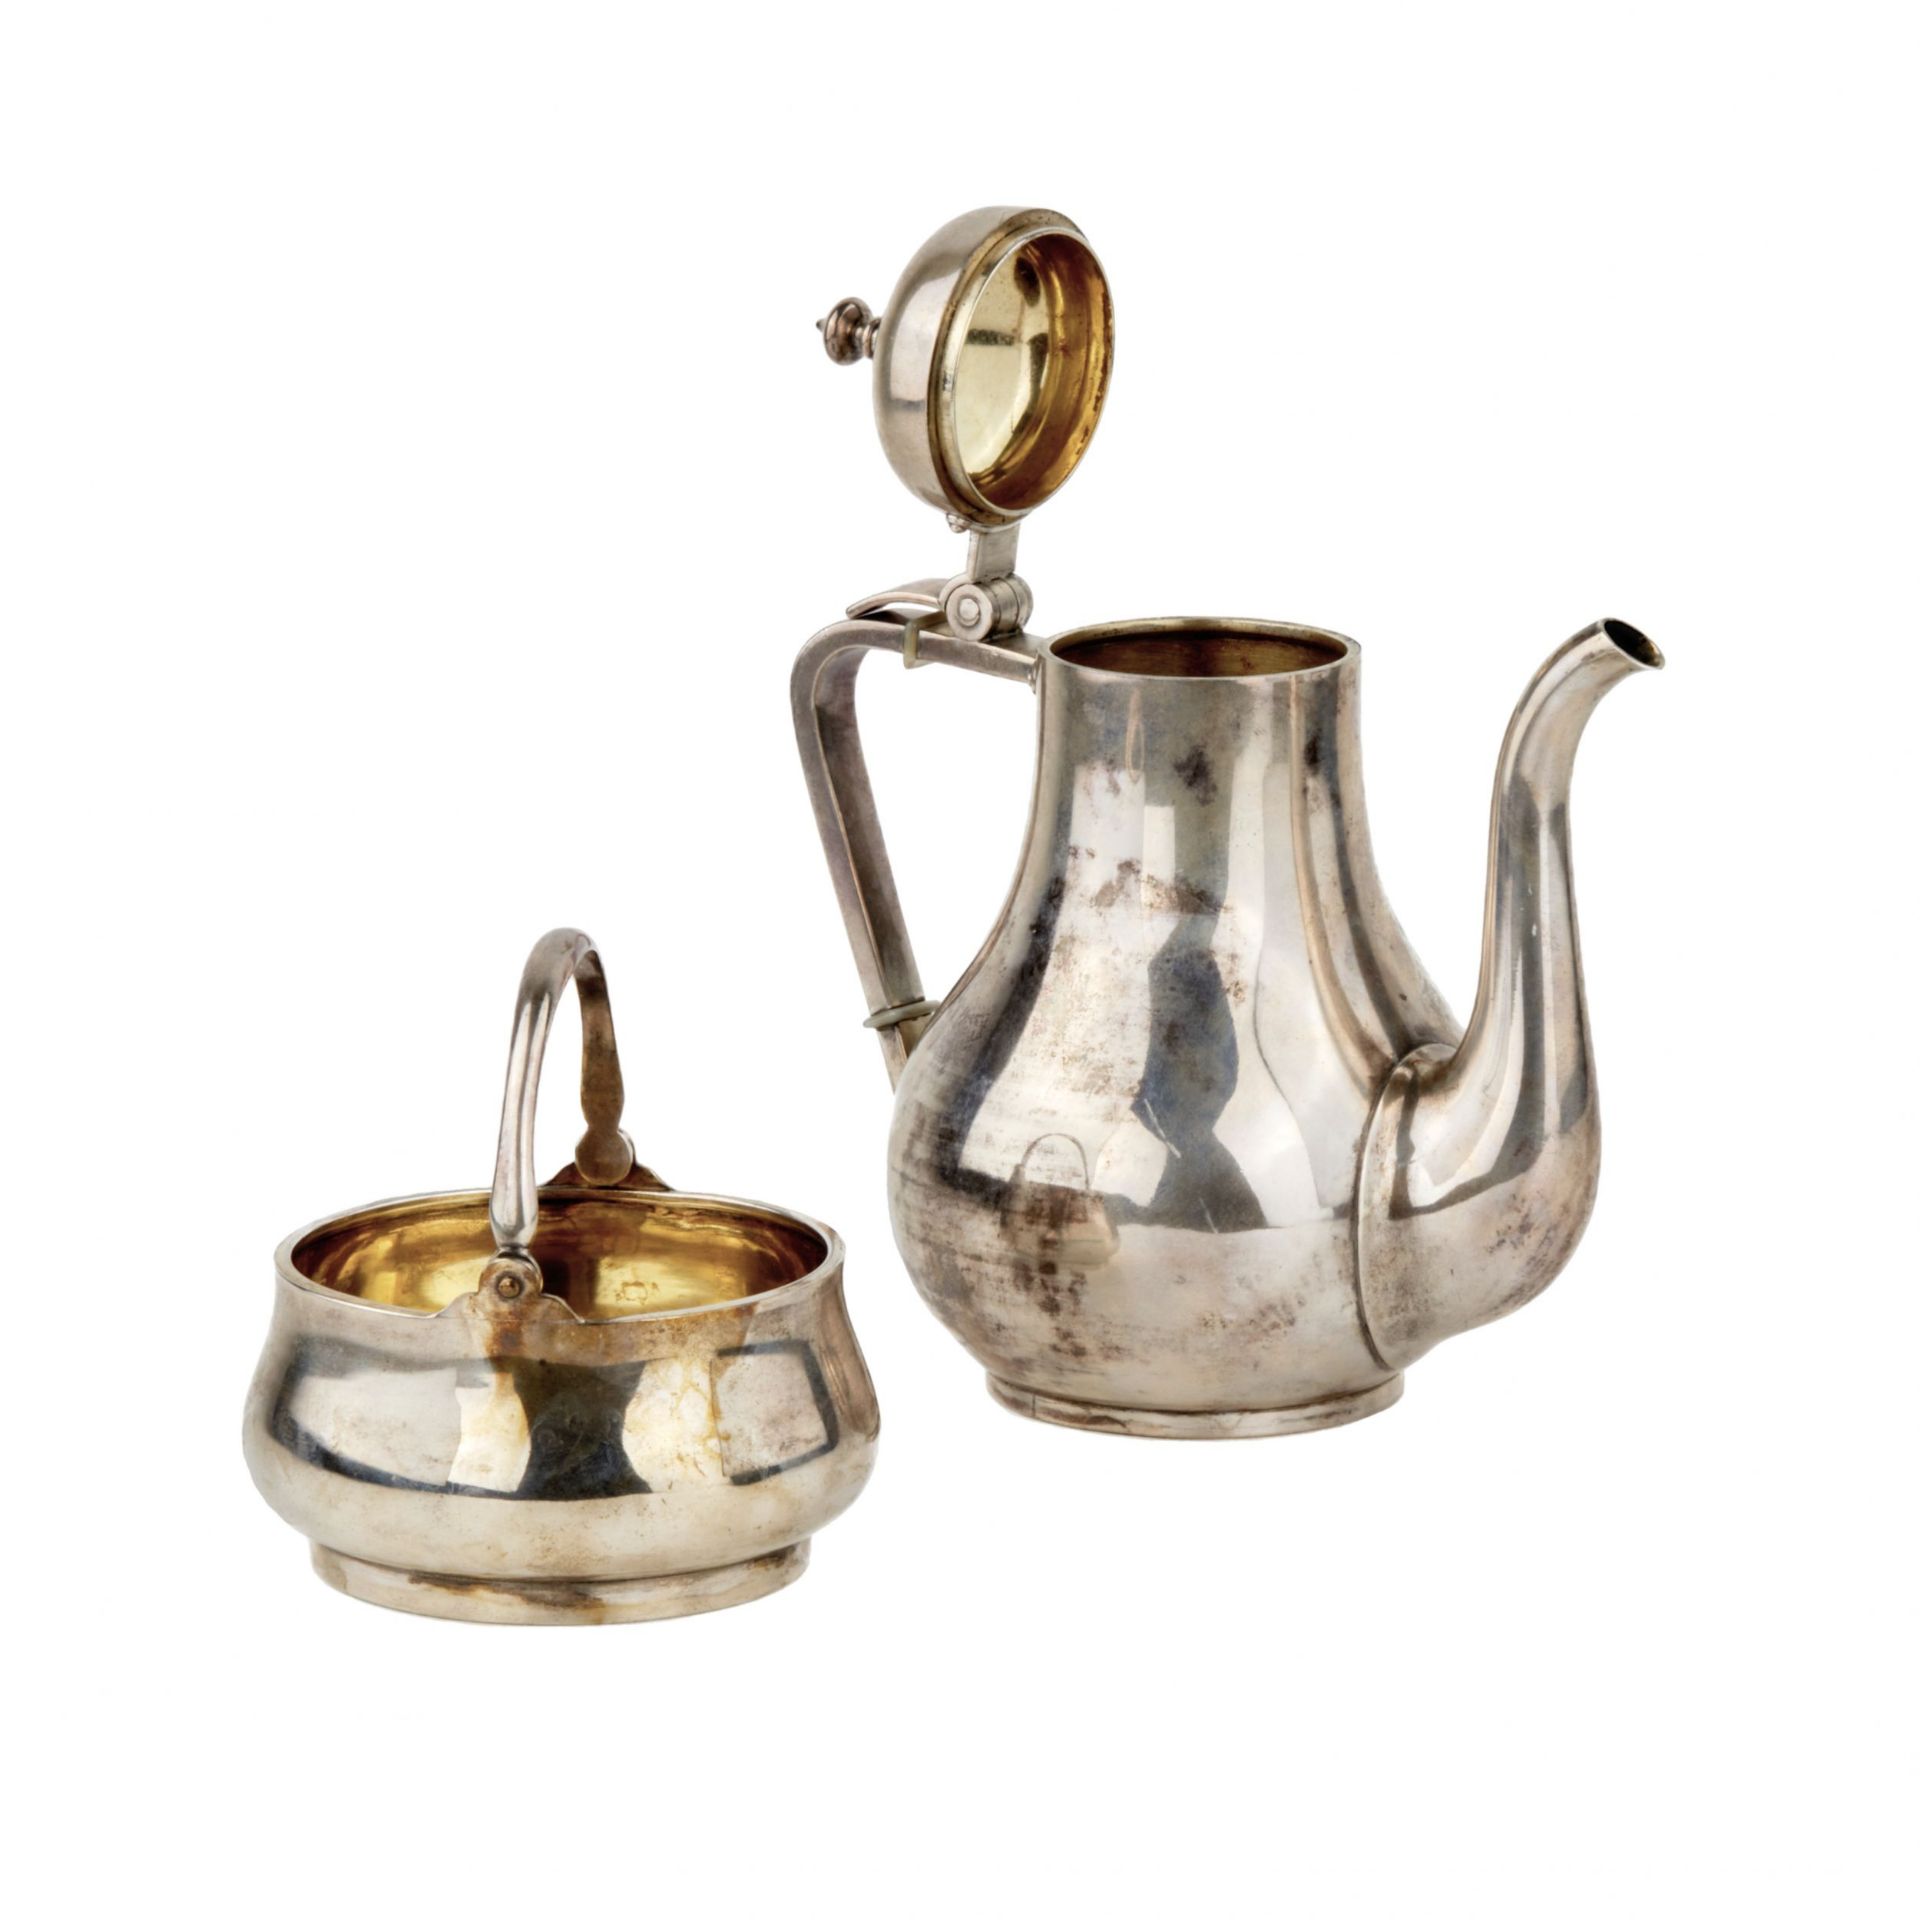 Silver teapot and sugar bowl by P. Ovchinnikov. - Image 2 of 7